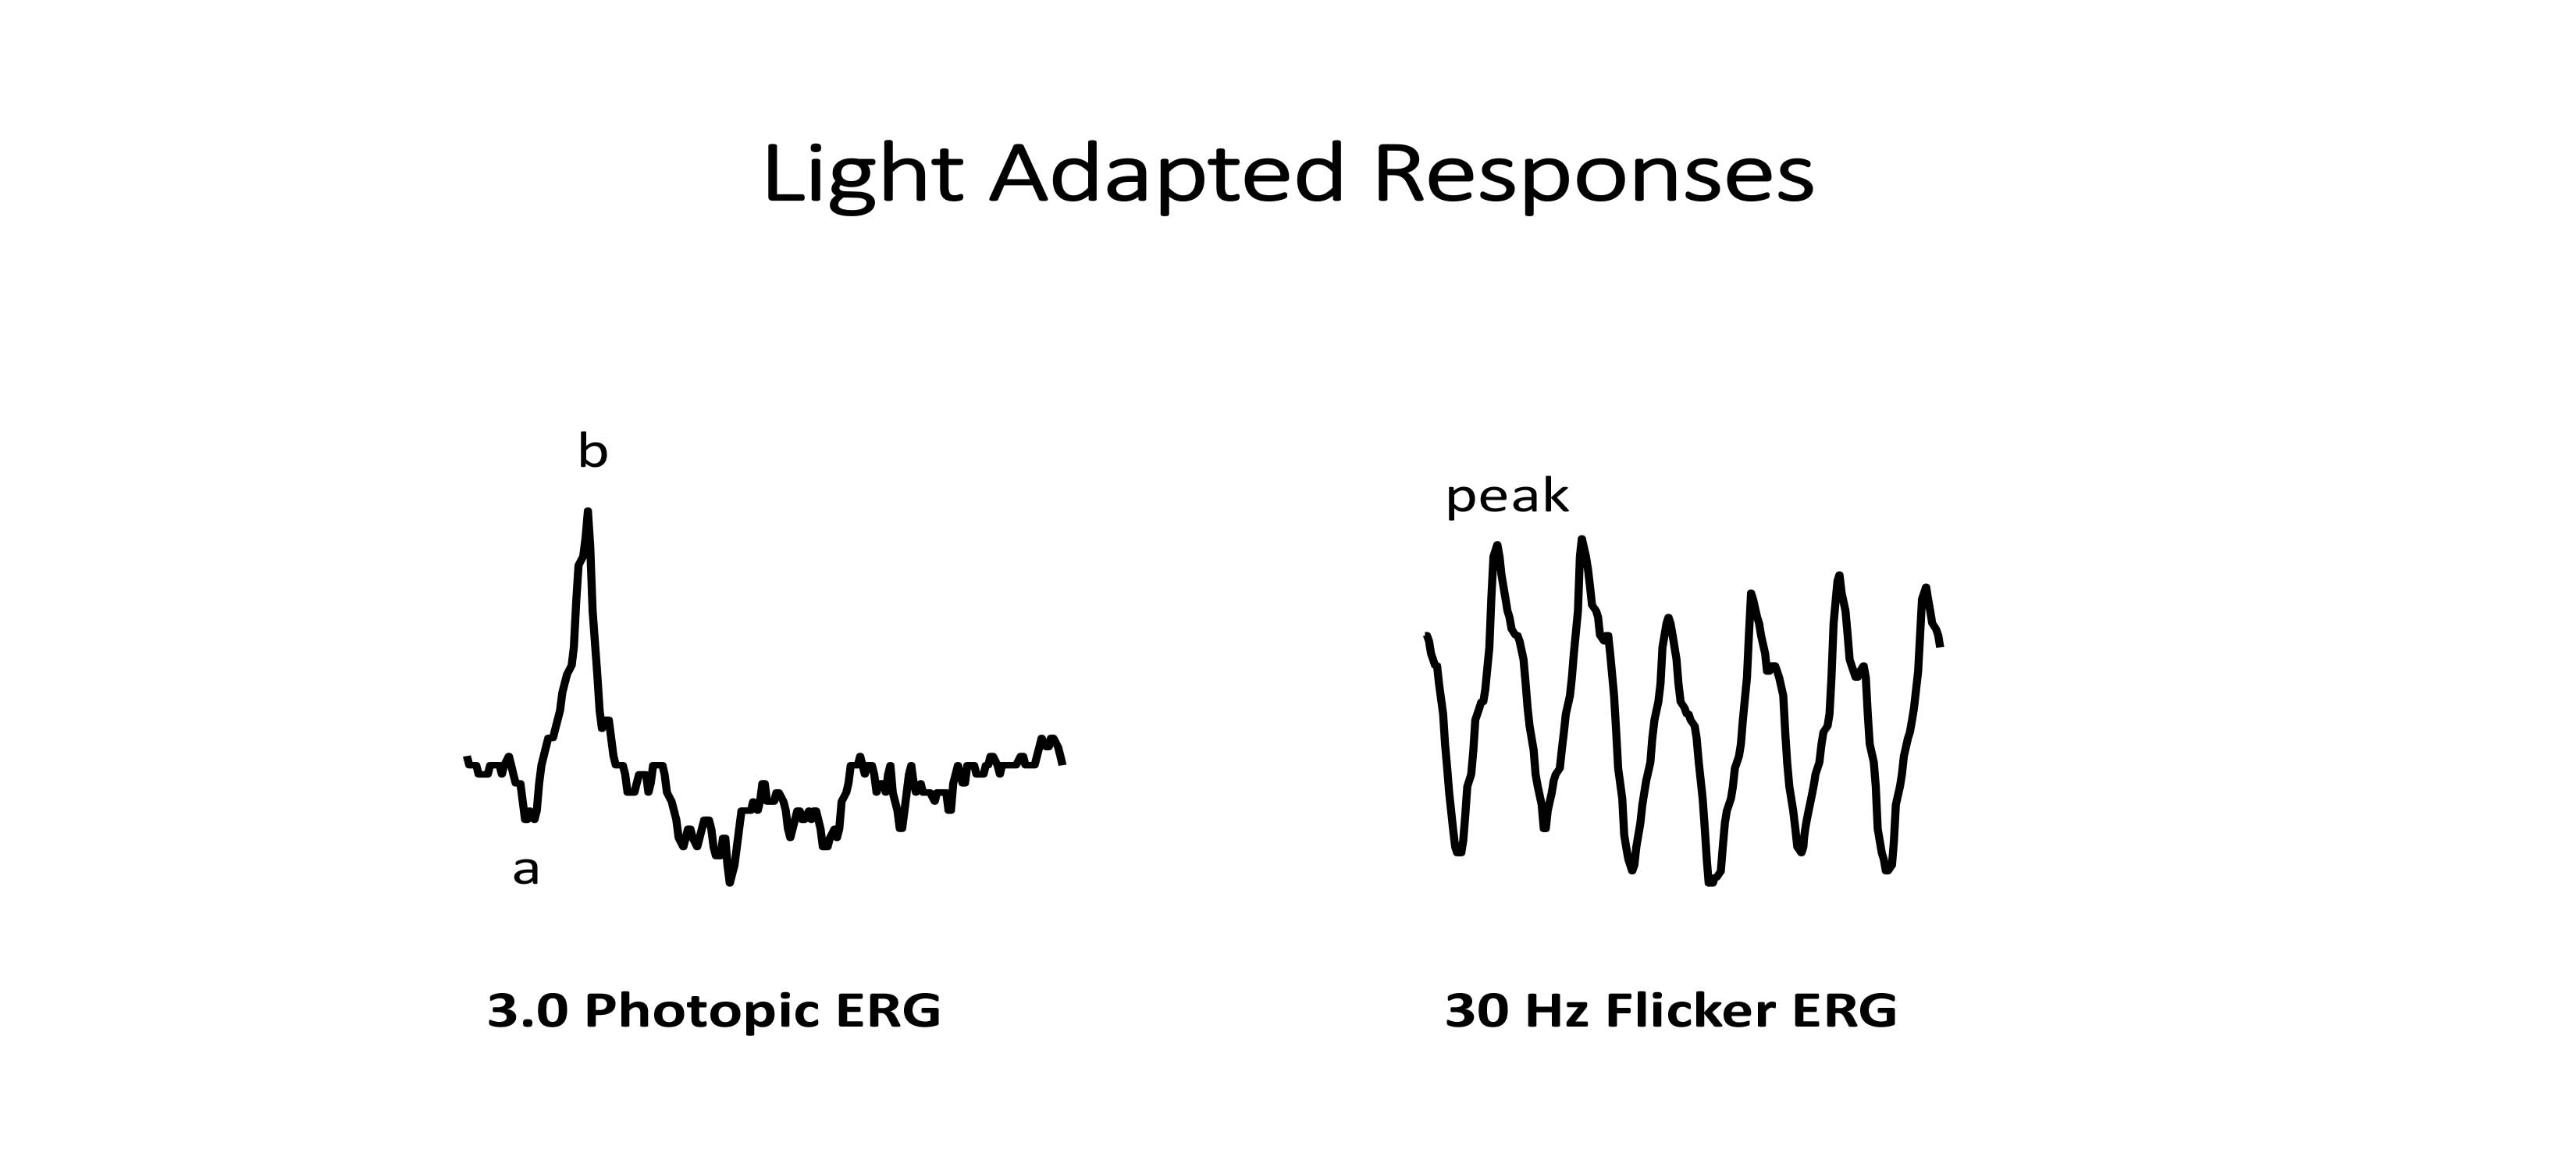 Illustration of a normal cone driven light adapted ERG response (3.0 Photopic ERG) and a normal 30 hz flicker ERG response